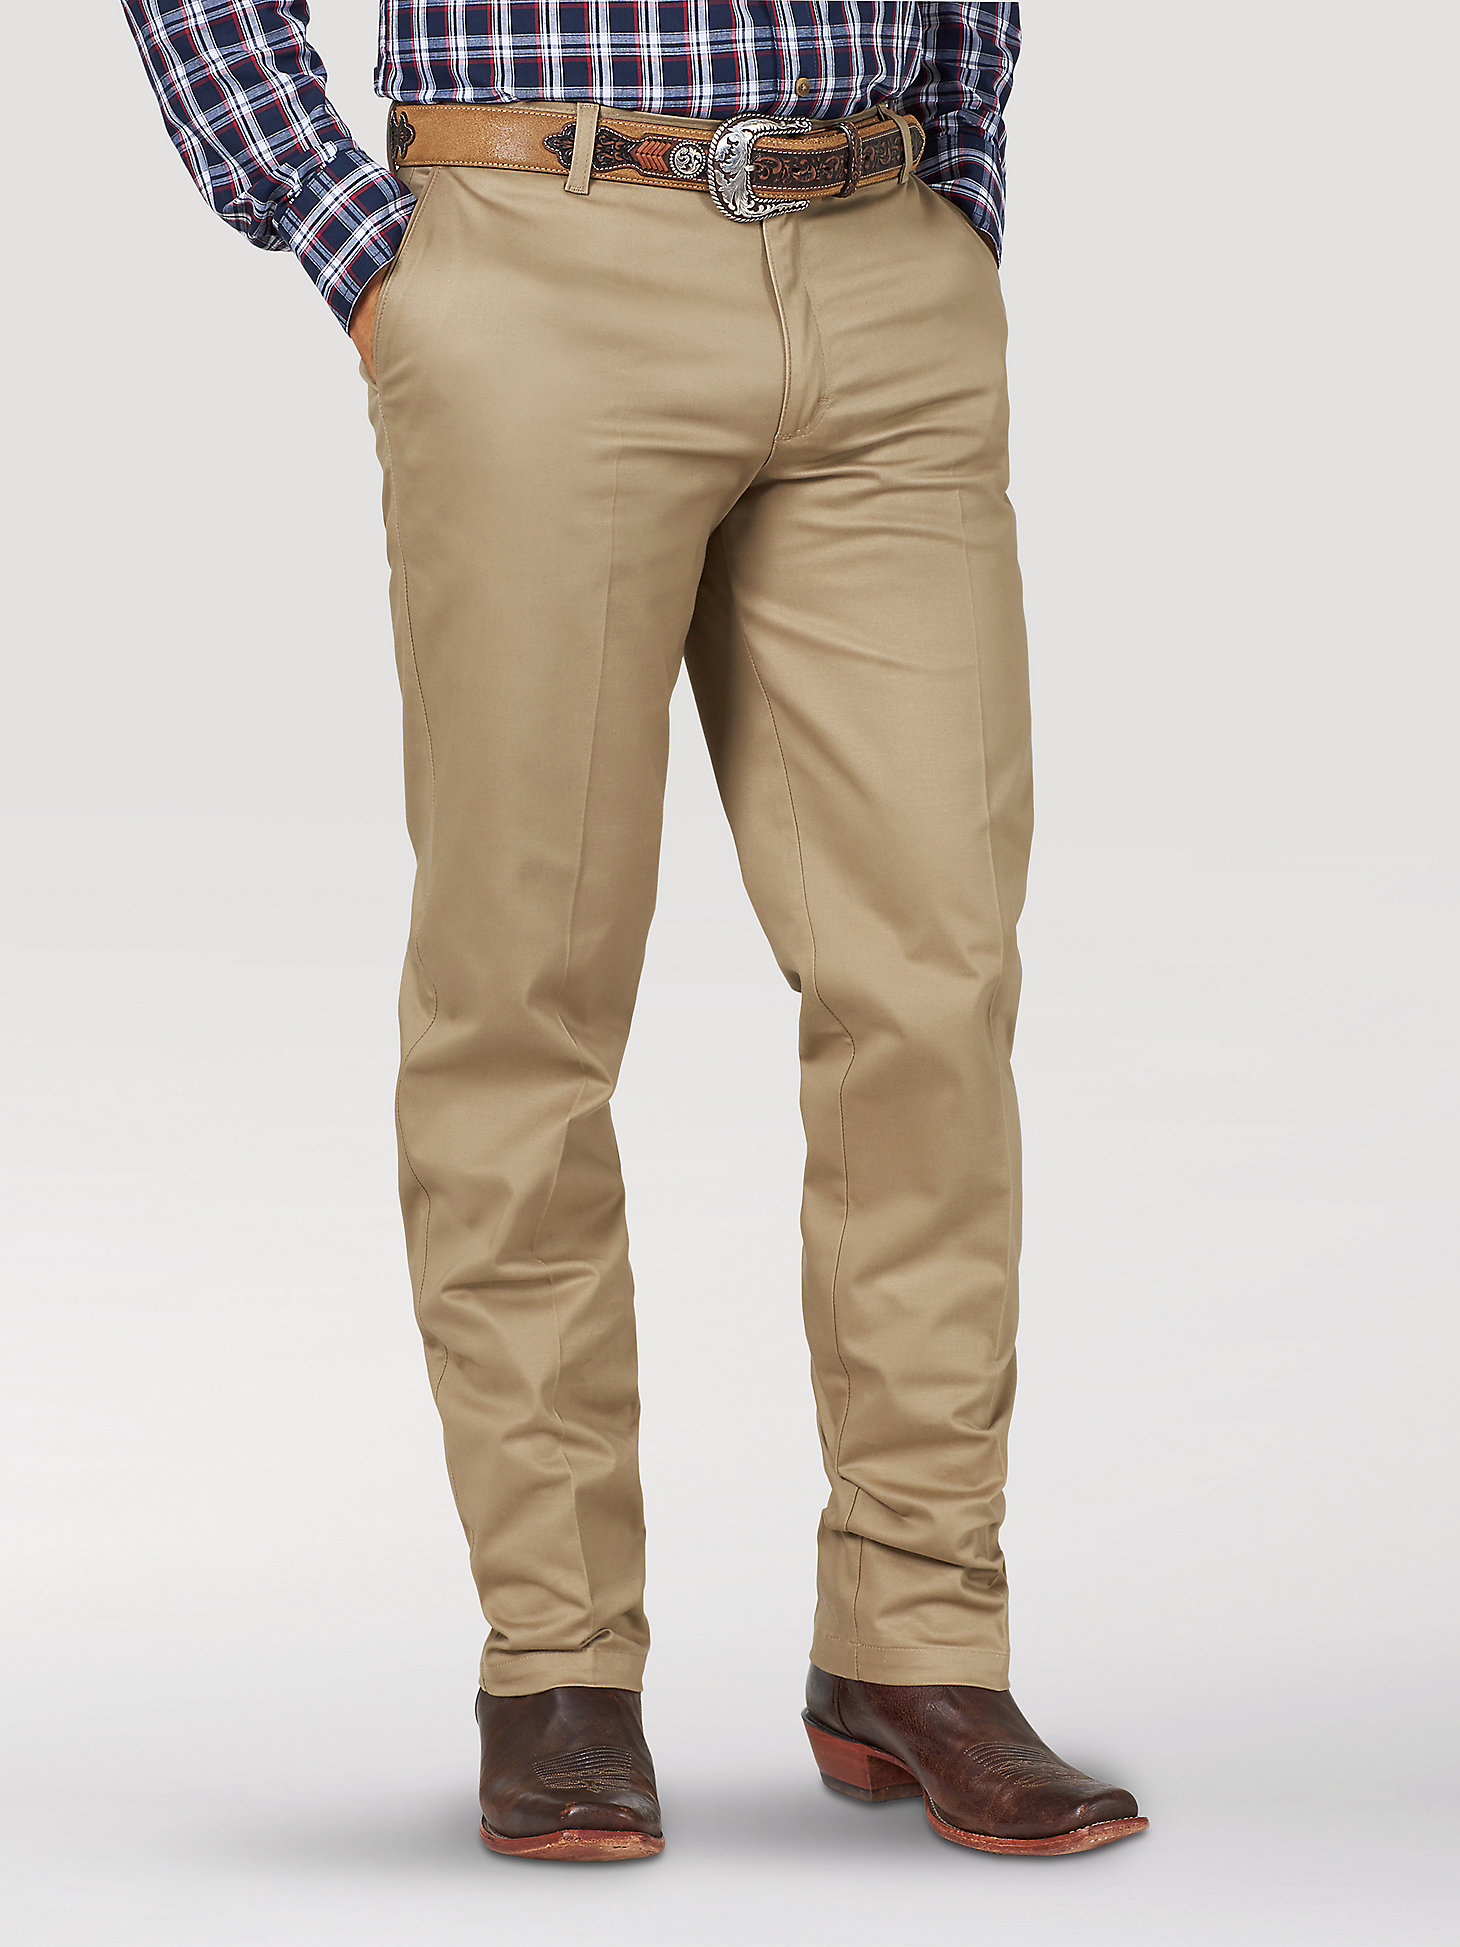 Essentials Men's Relaxed-fit Casual Stretch Khaki 